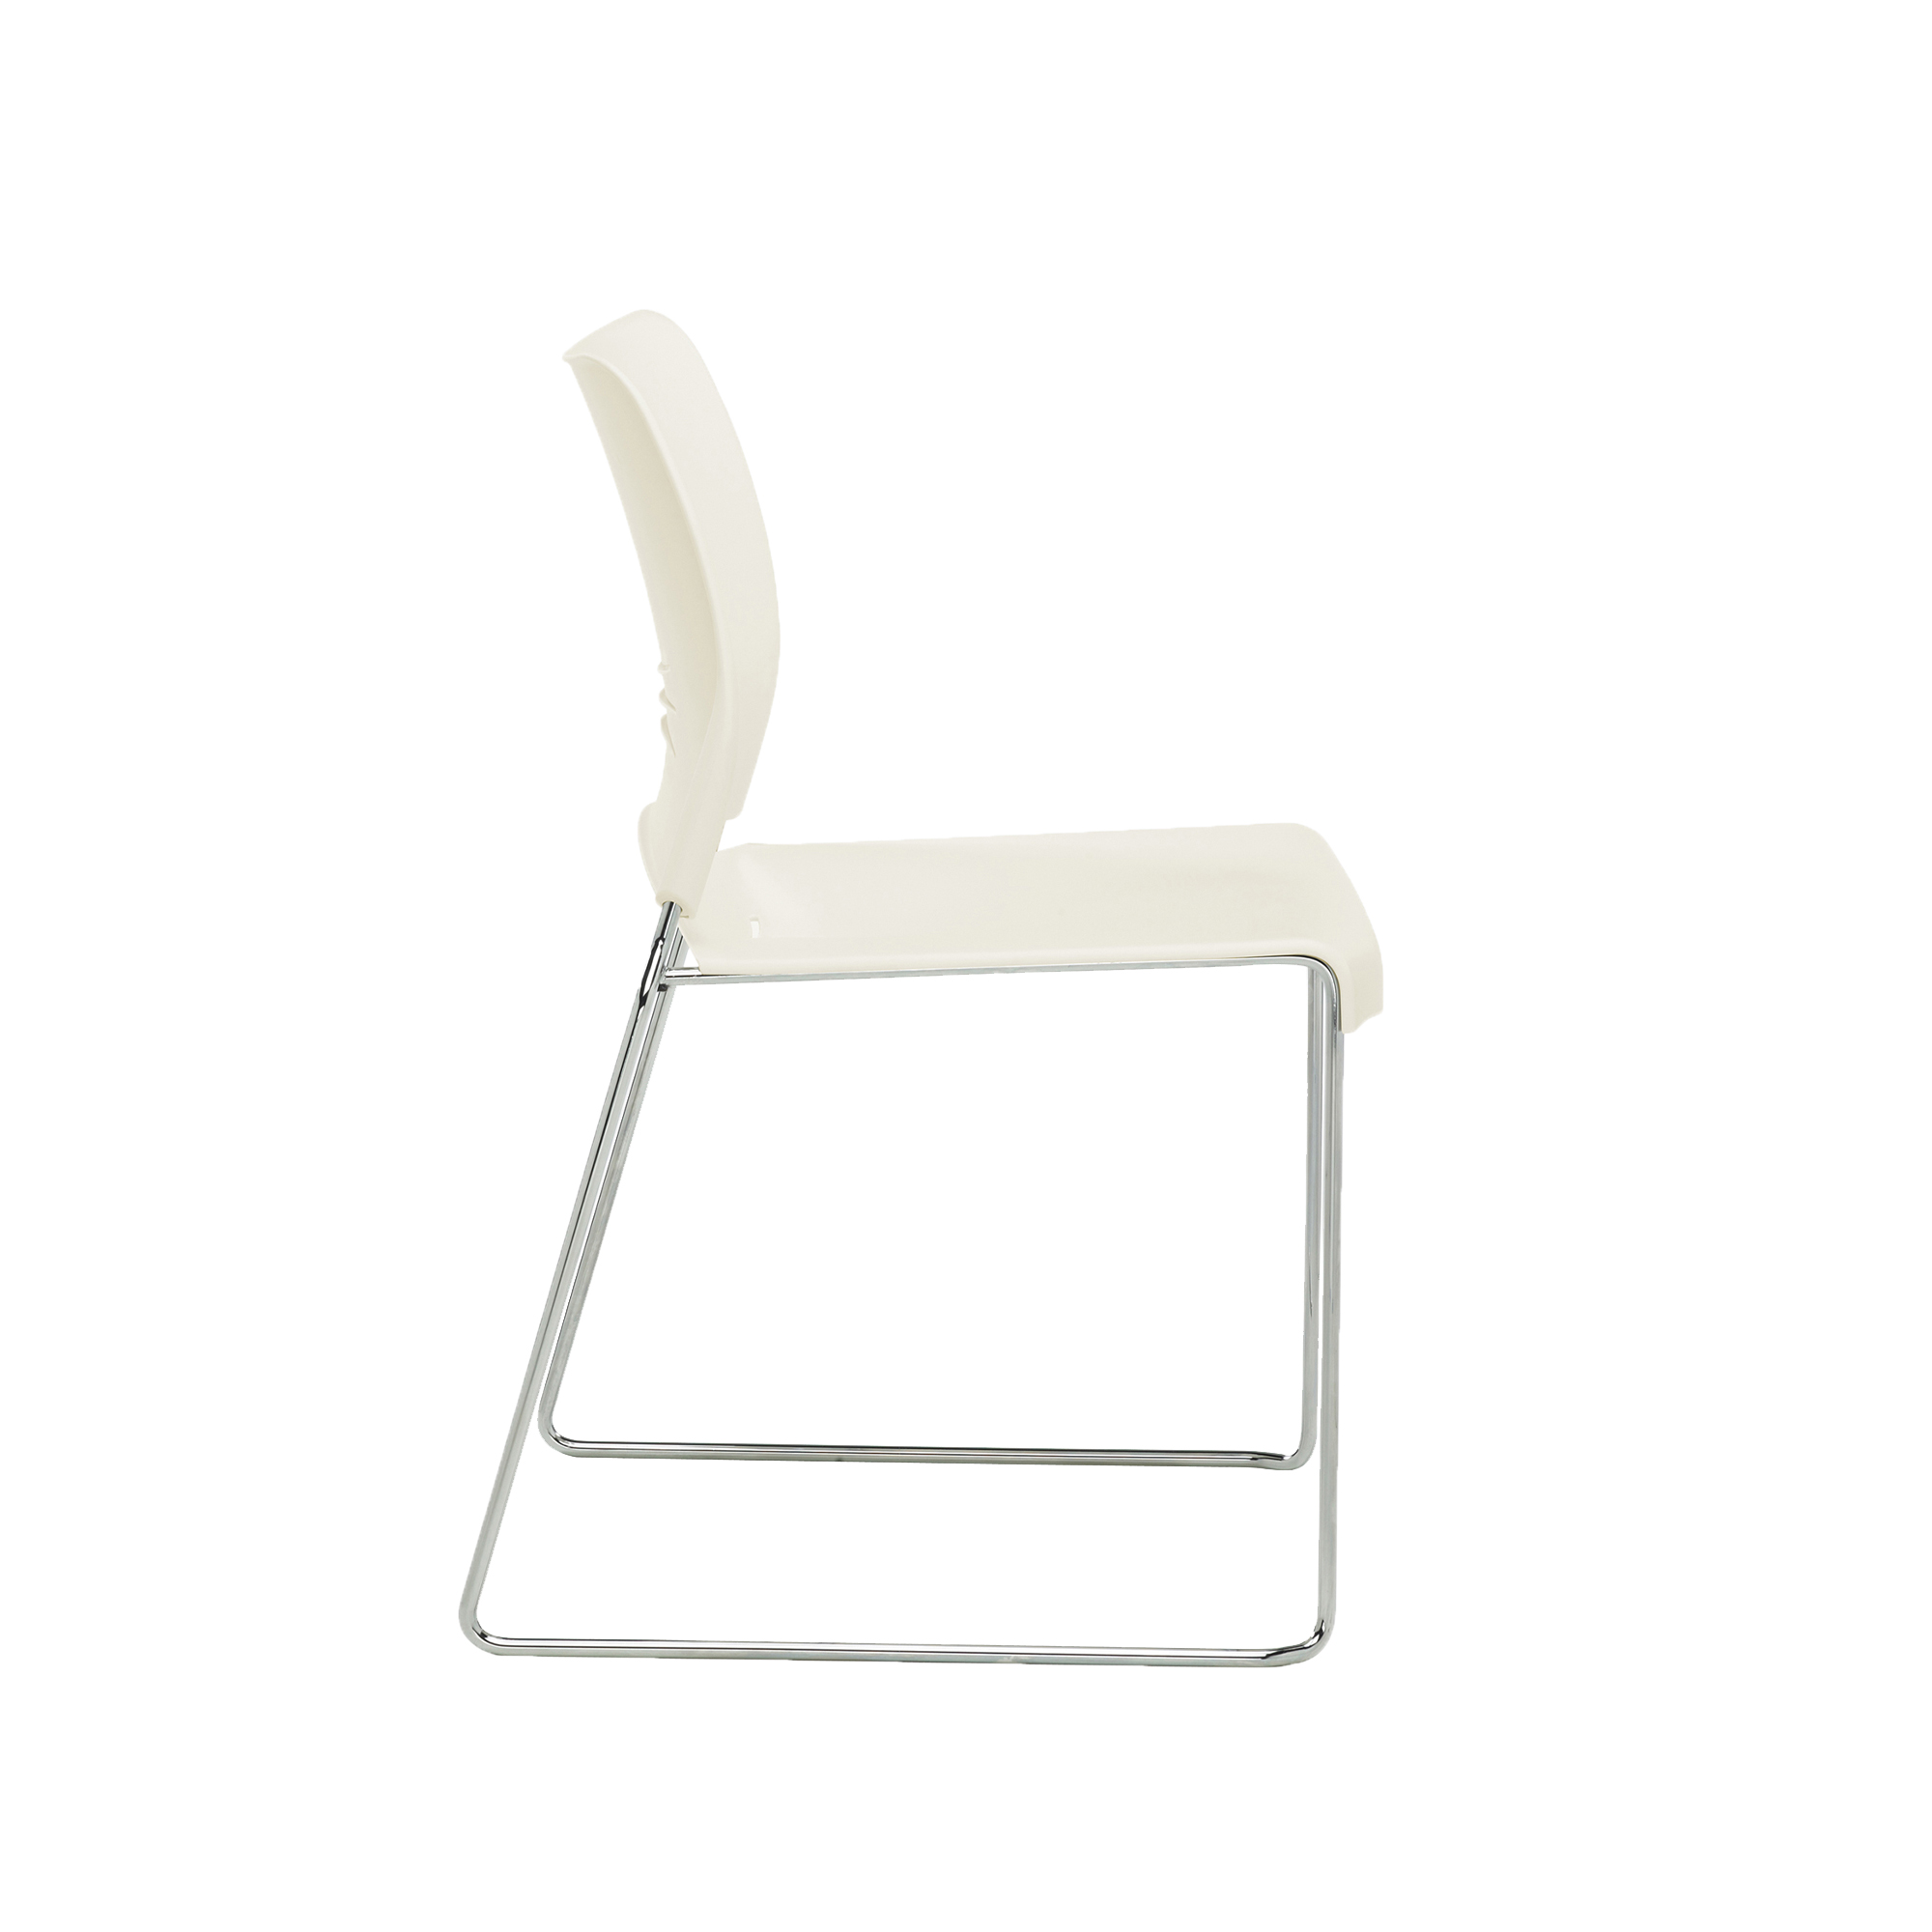 Flurry Guest Chair, Soft White